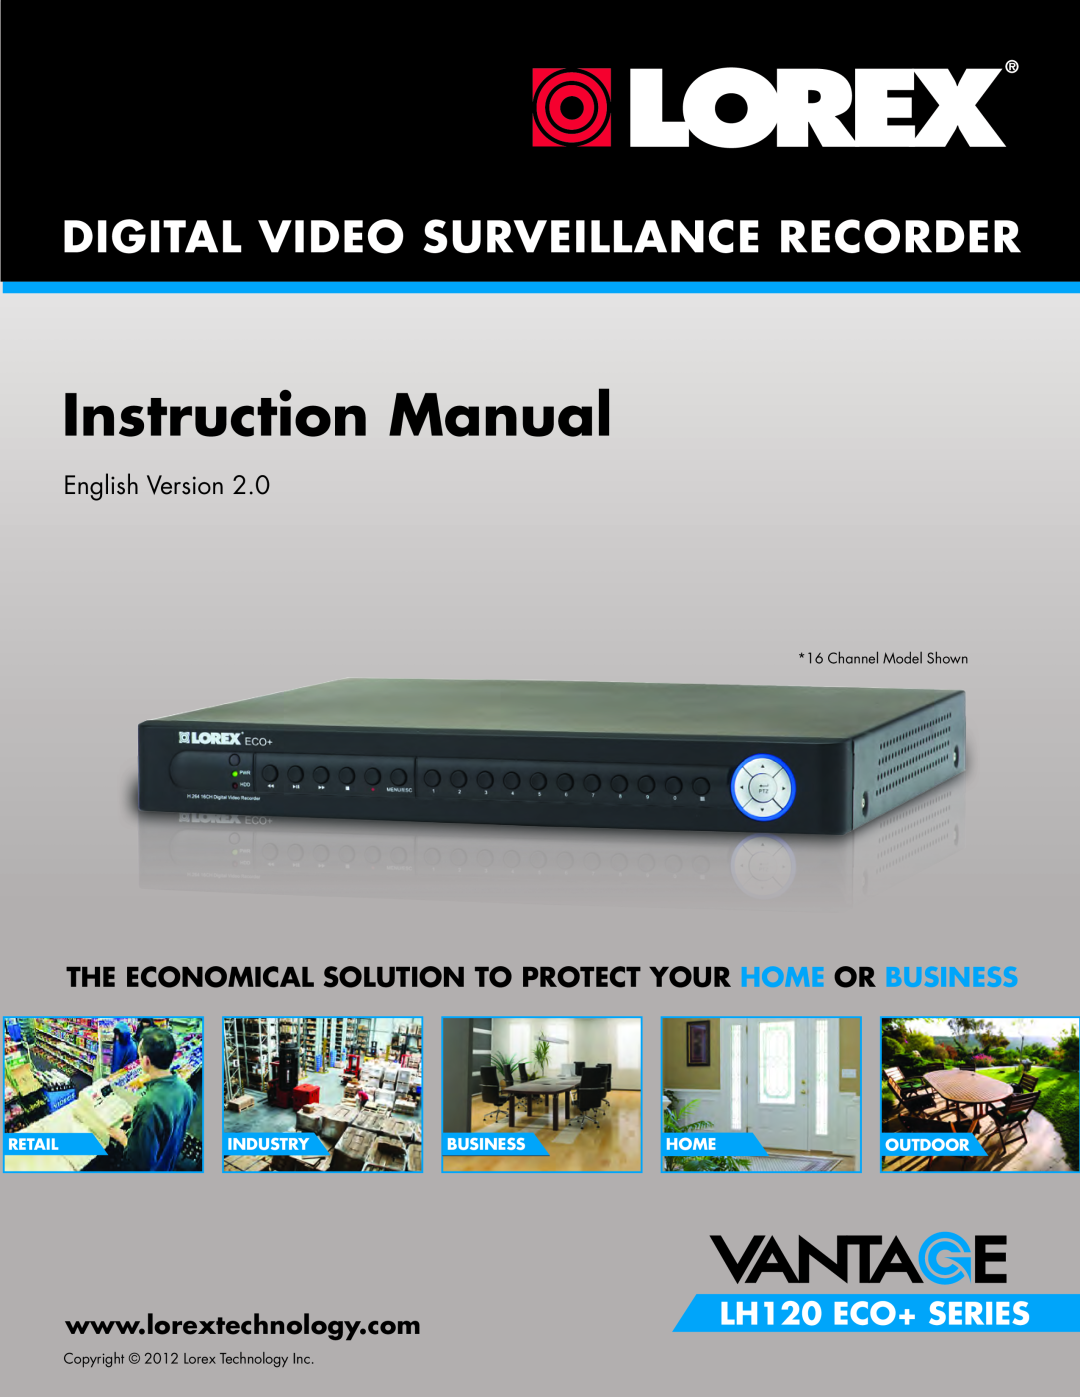 Lorex 16 channel security dvr with 500GB hard drive, remote viewing manual English Version, Instruction Manual, Industry 